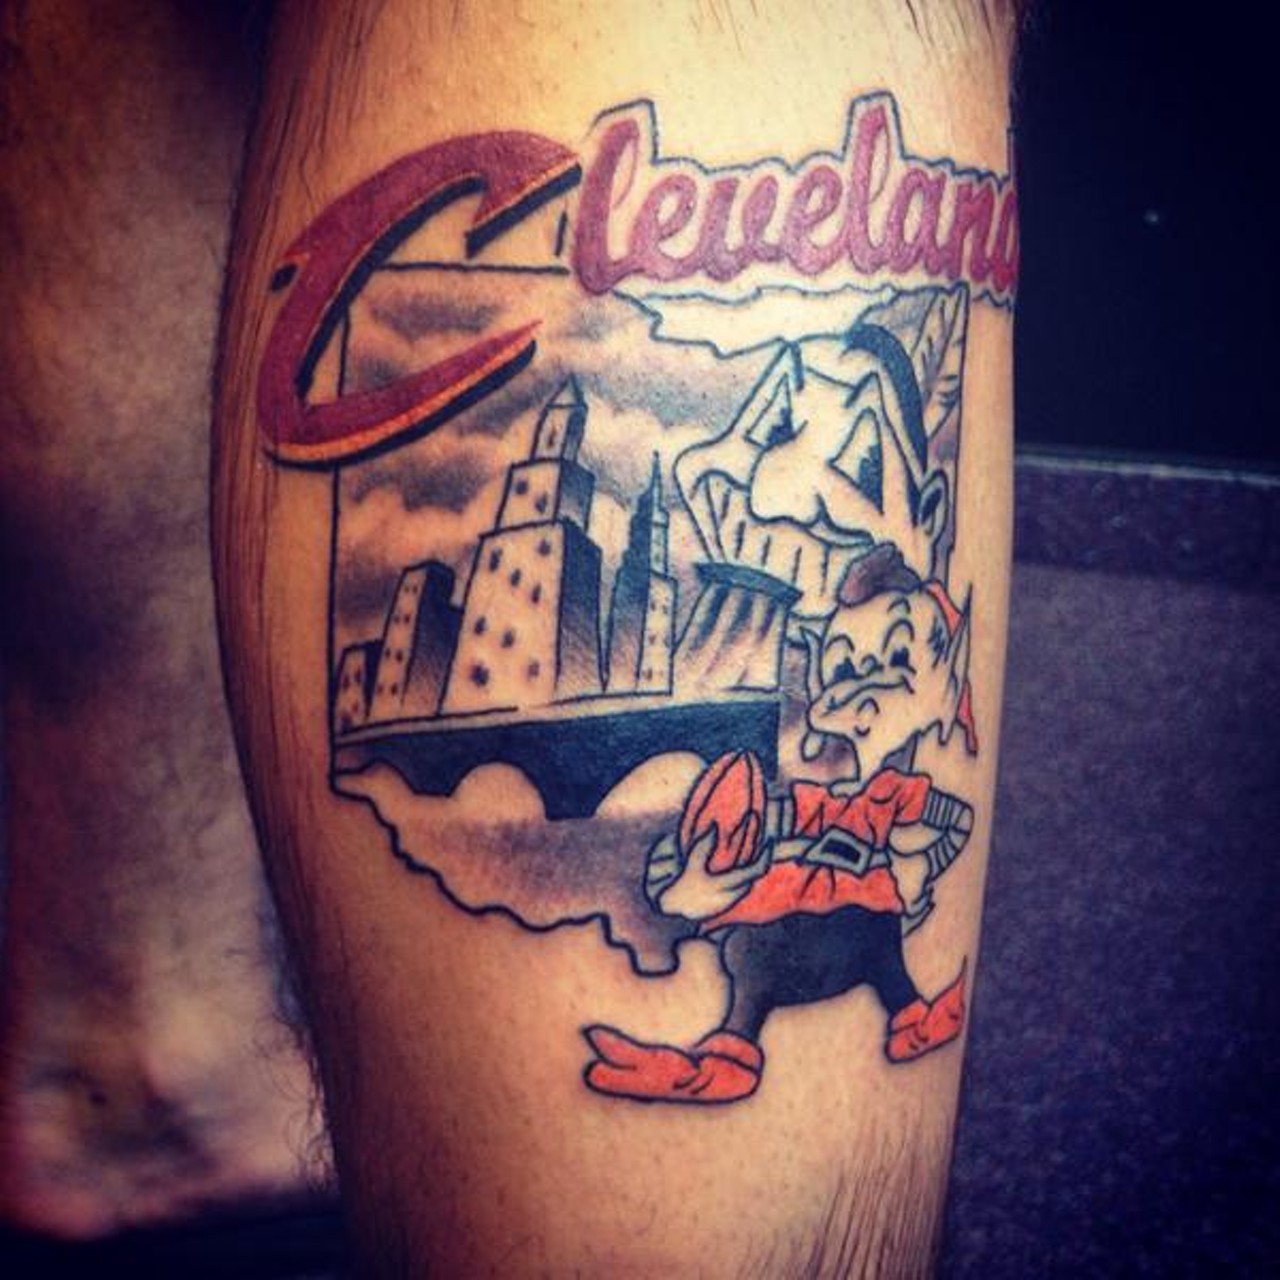 Tattoo uploaded by Jose  First outline session of my Cleveland sports  celebation tatt Cavs Browns Indians OhioStateBuckeyes FirstTattoo   Tattoodo